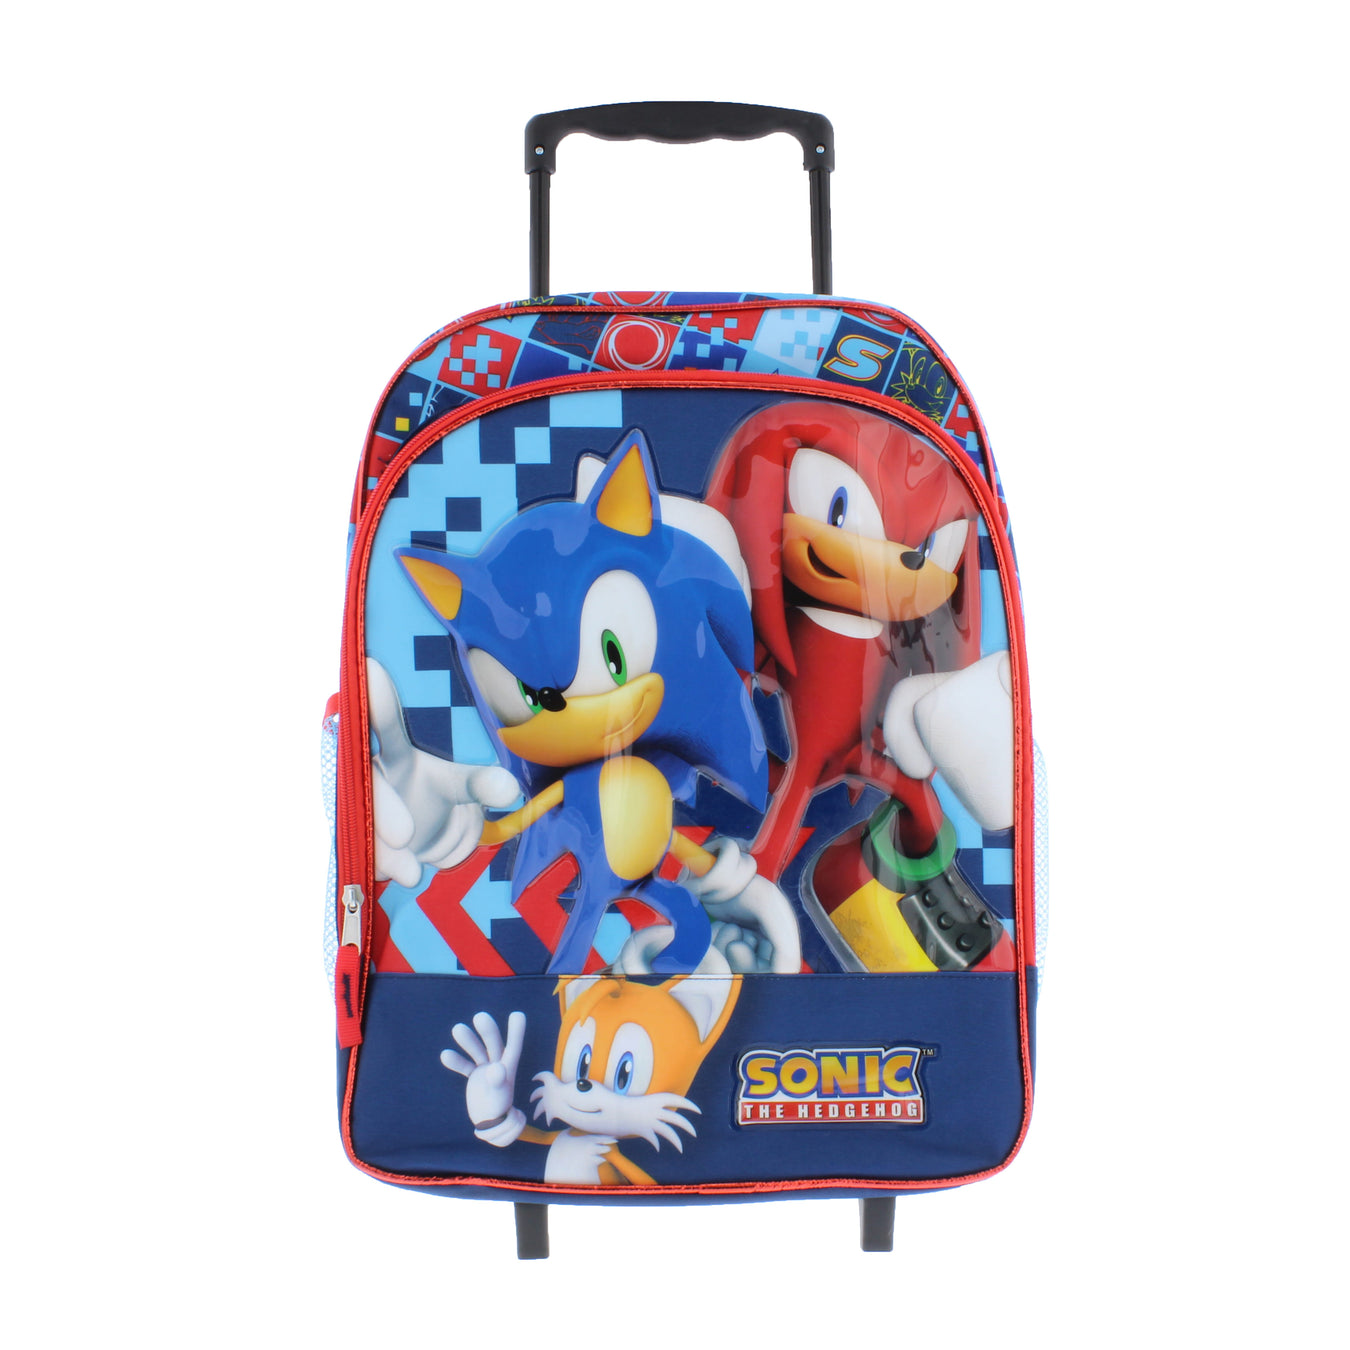 Accessories - Bags - Backpacks with Wheels